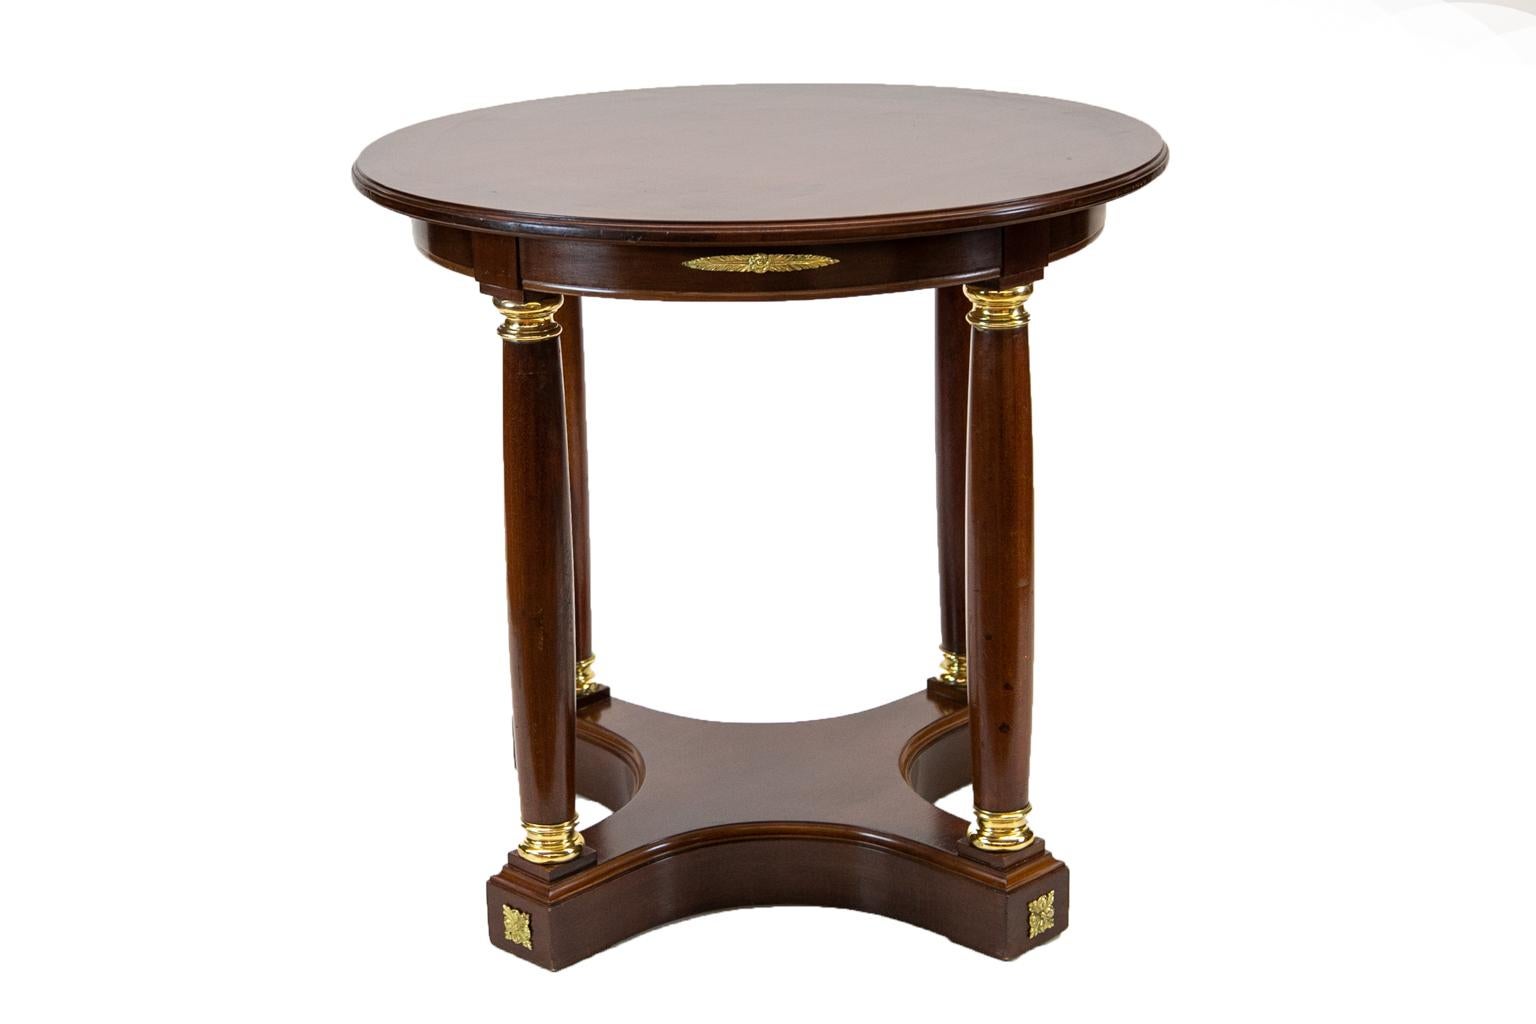 French mahogany center table, the top having a molded edge and is supported by four columns that have brass capitals and bases which terminate in a platform plinth base with concave shaping. The apron has applied brass ornamentations. The brass is